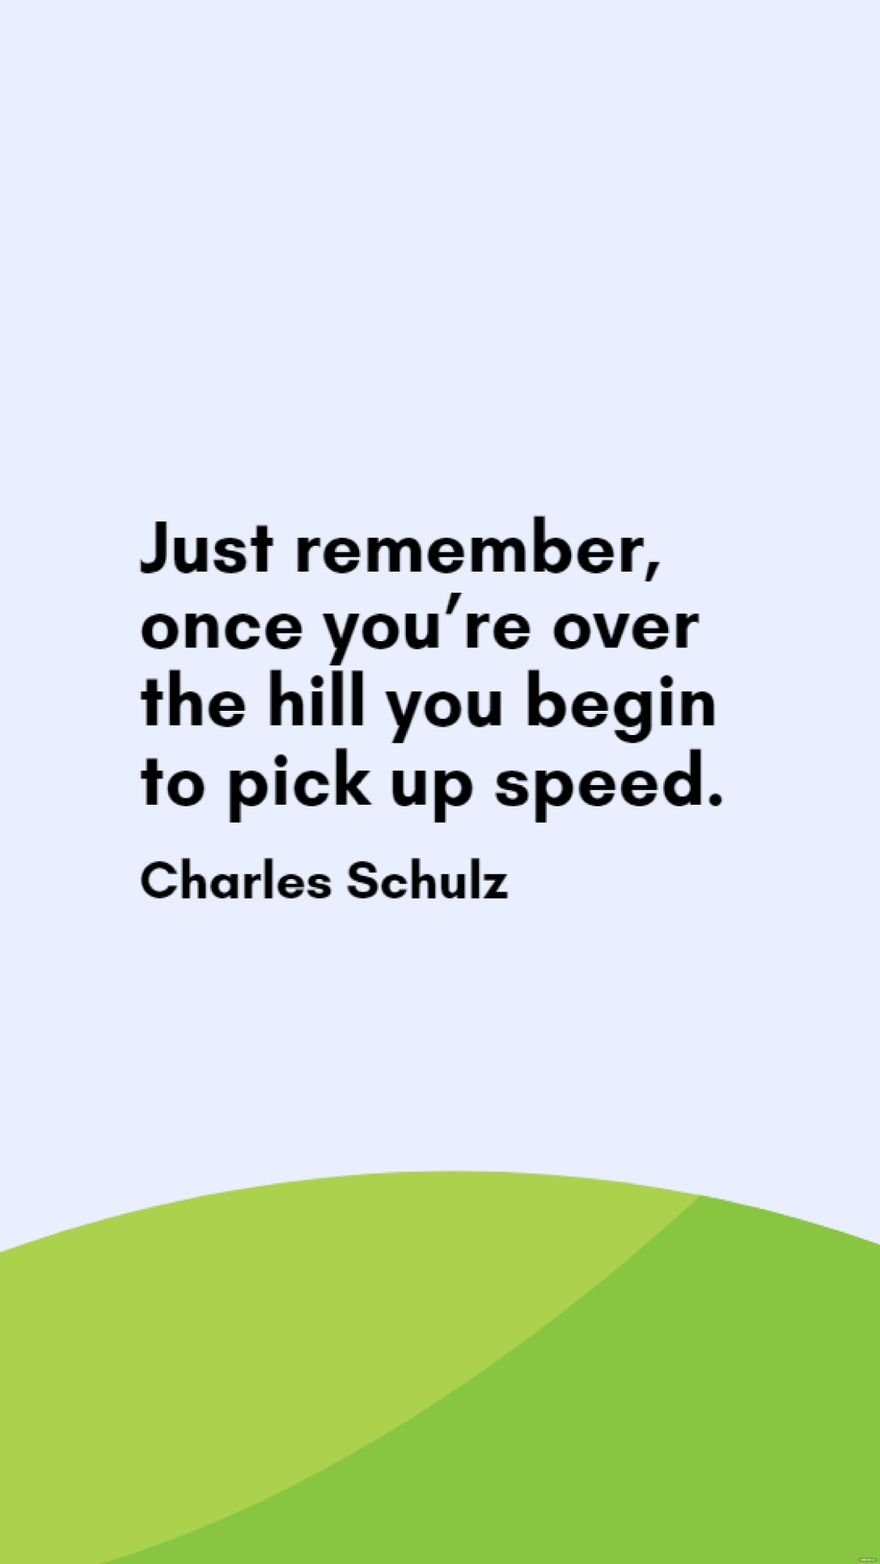 Free Charles Schulz - Just remember, once you're over the hill you begin to pick  up speed. - Download in JPG